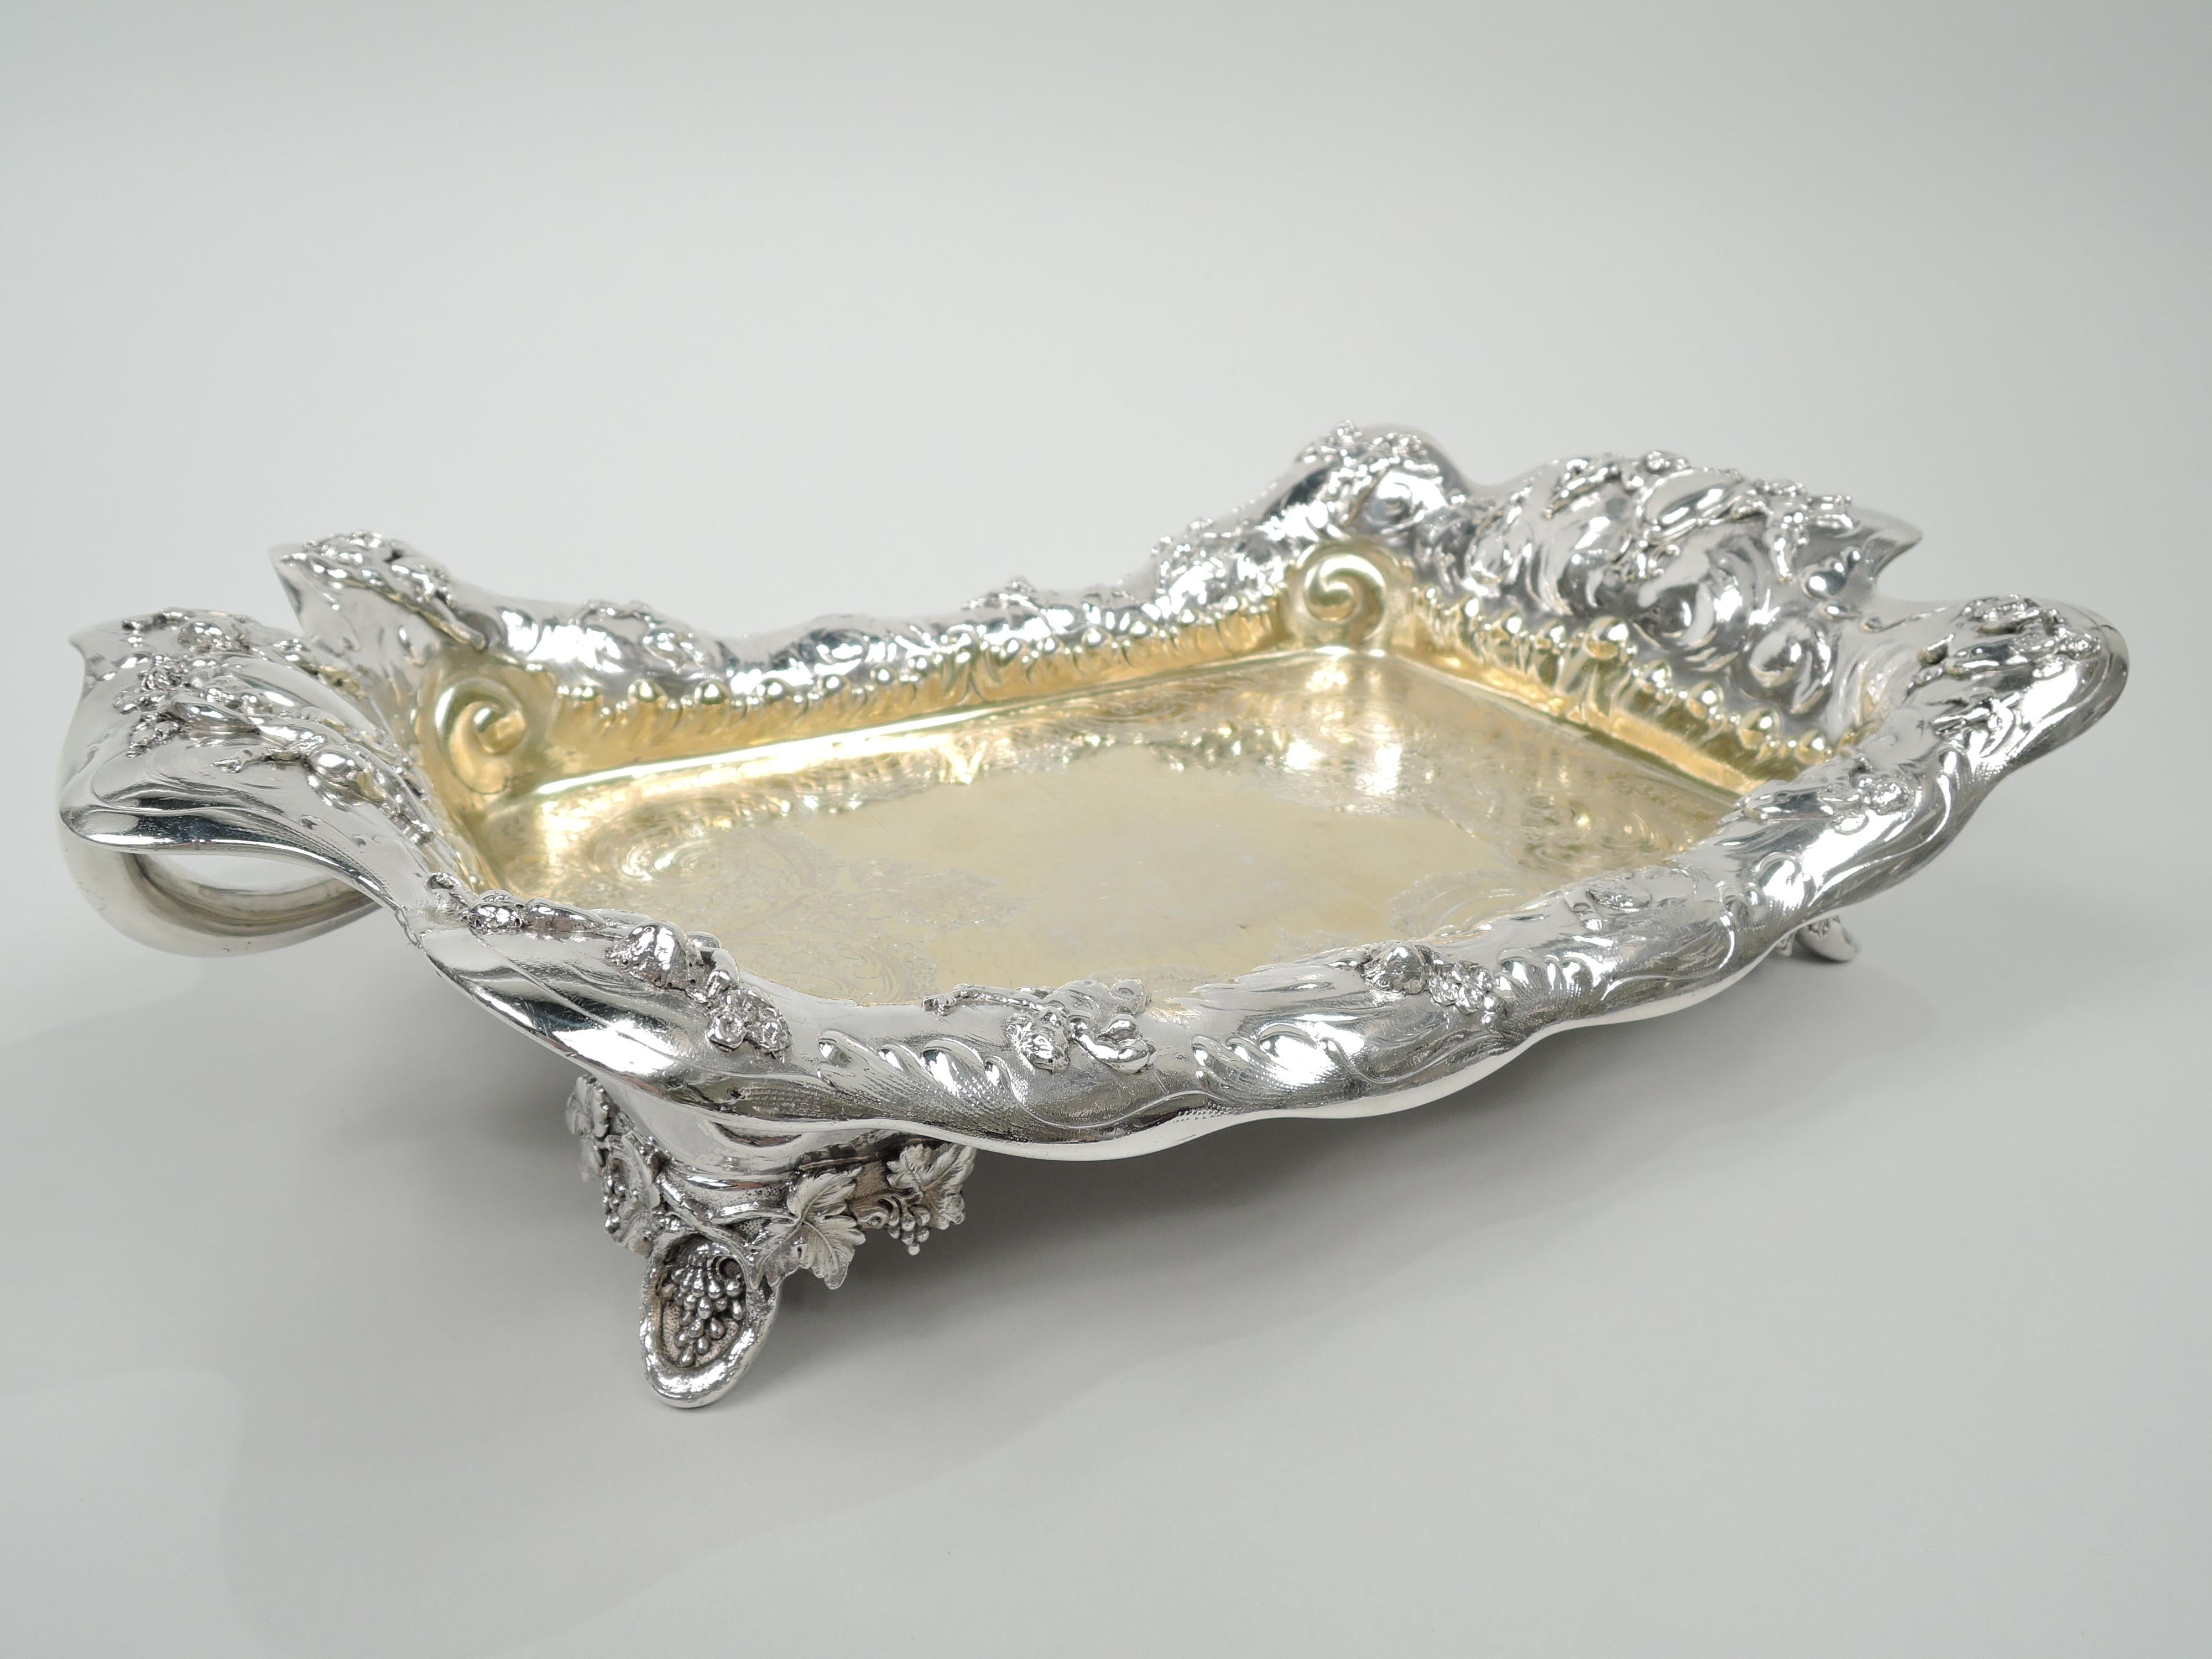 American Sumptuous Tiffany Victorian Classical Sterling Silver Serving Dish